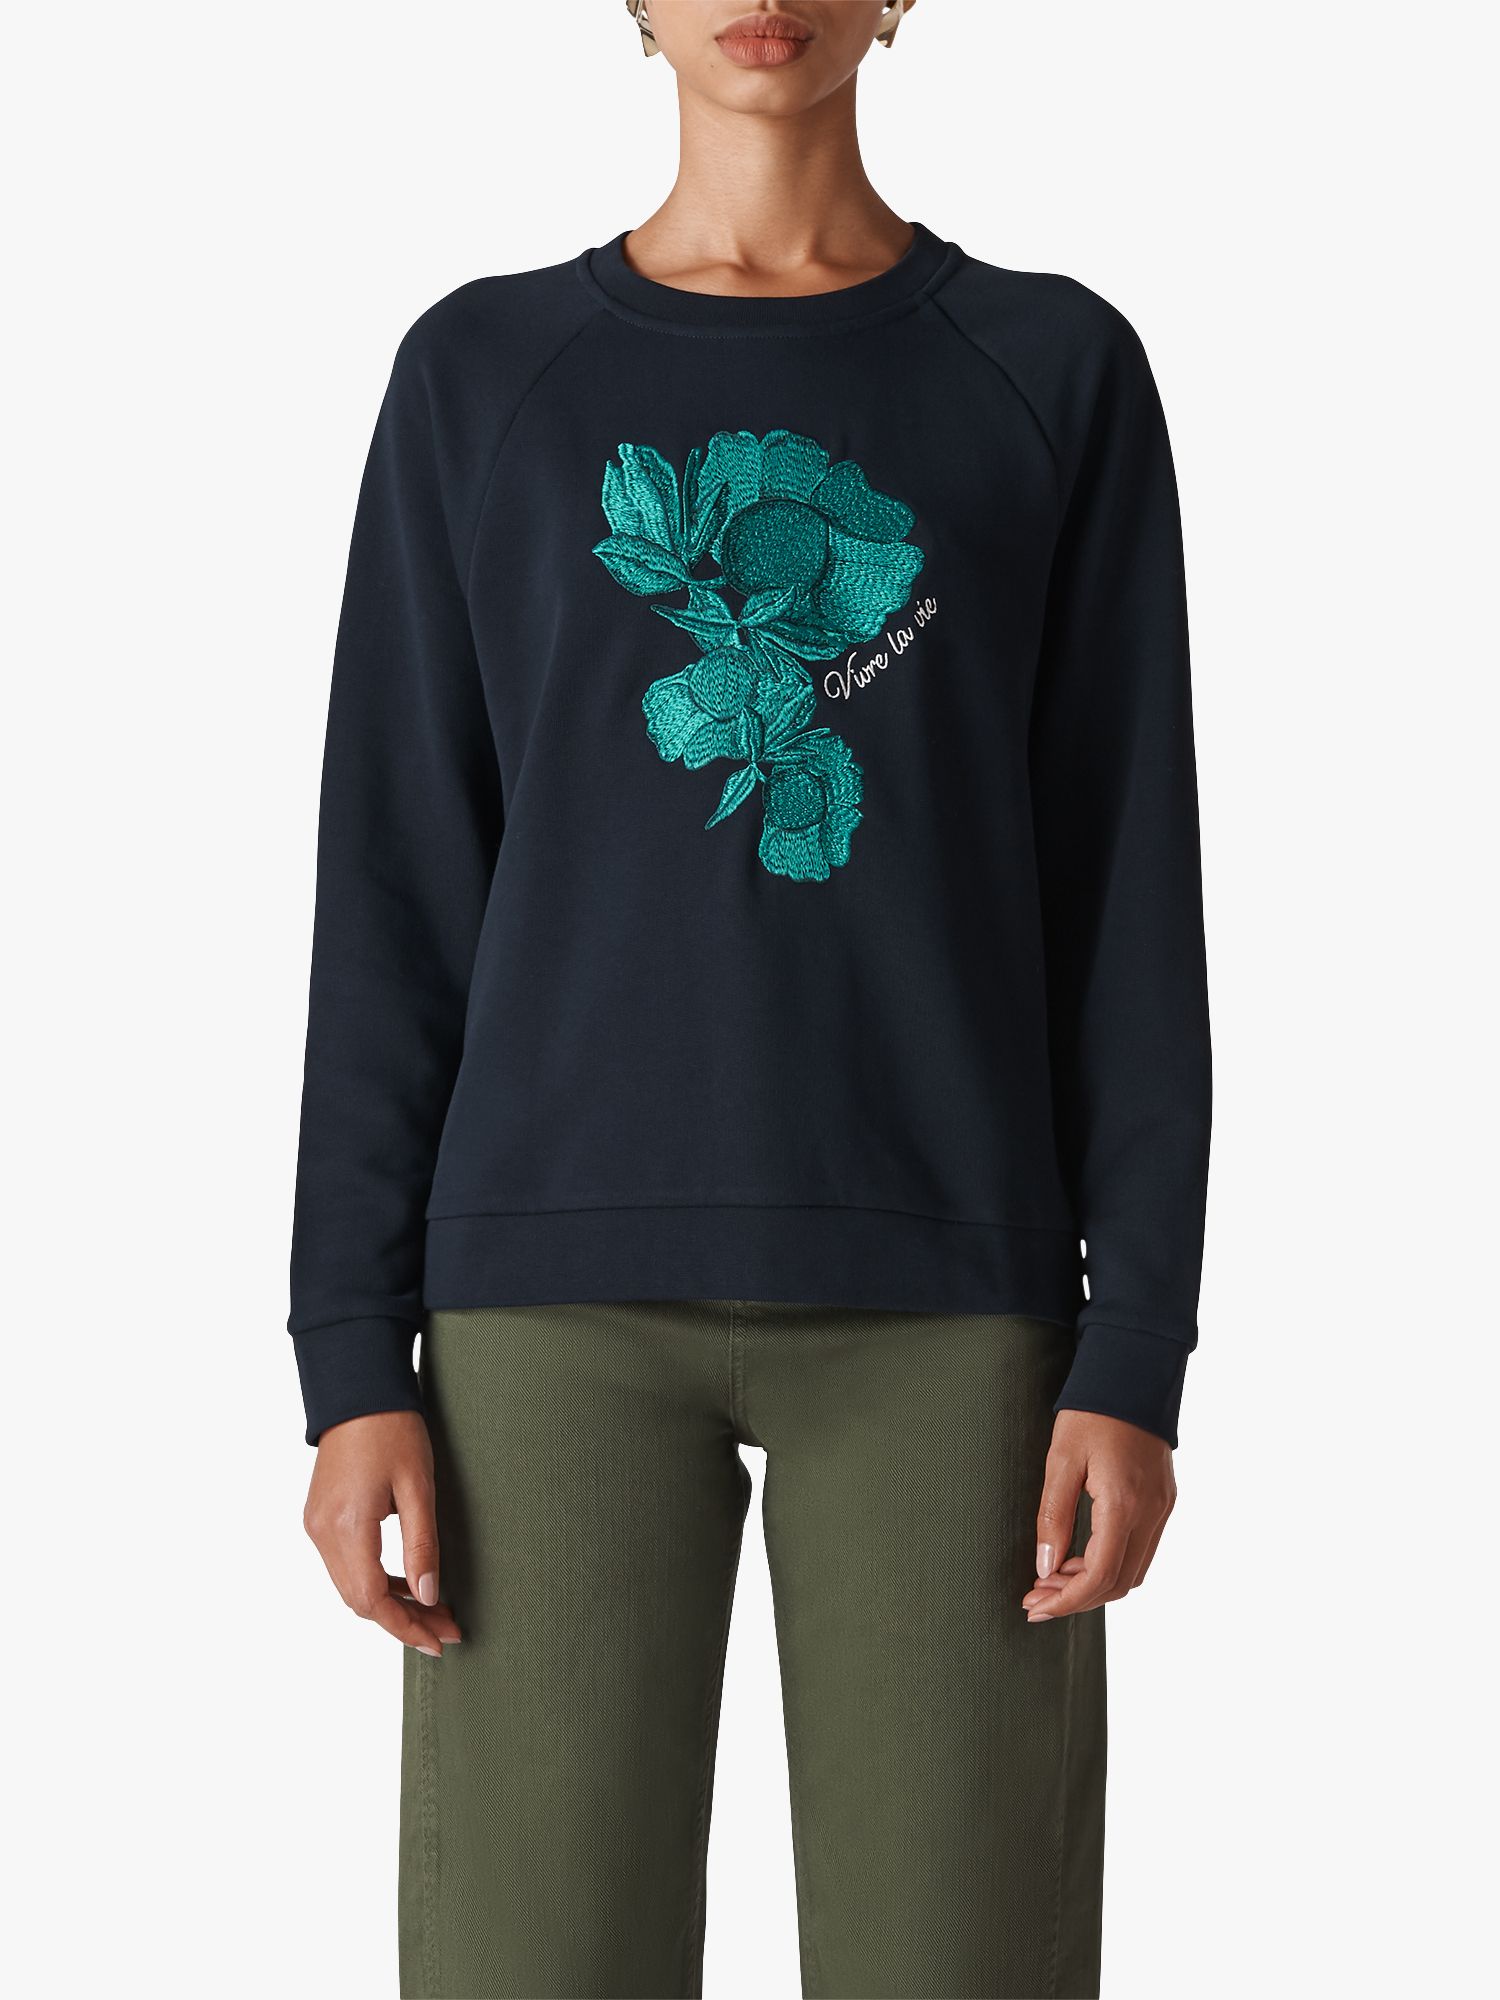 Whistles Floral Embroidered Jumper, Navy